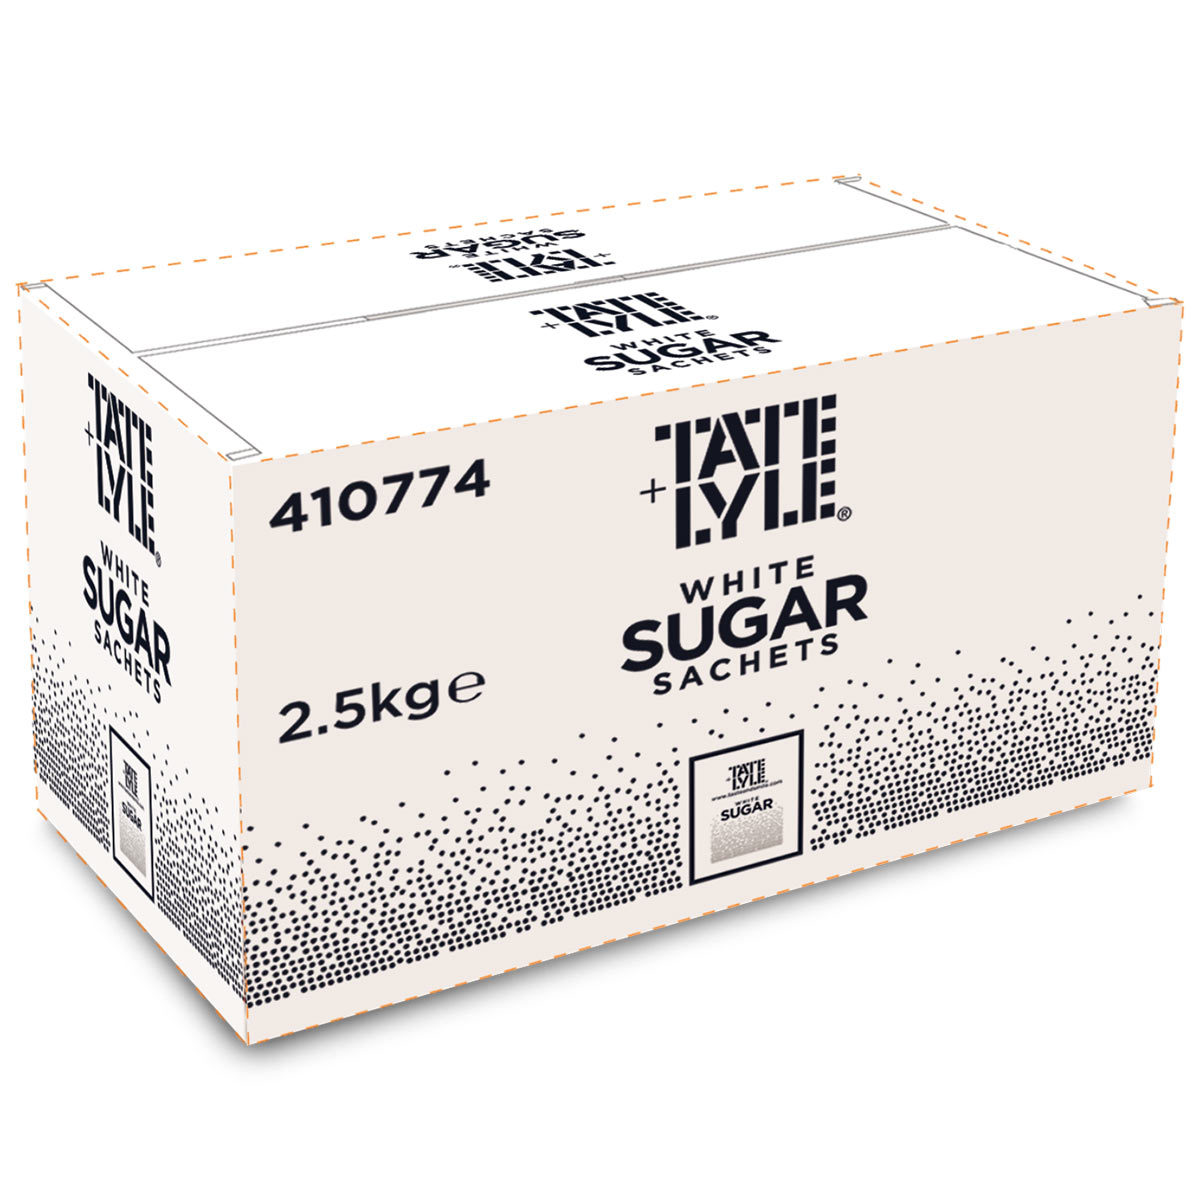 Image of white Tate & Lyle box on white background with White Sugar Sachets text